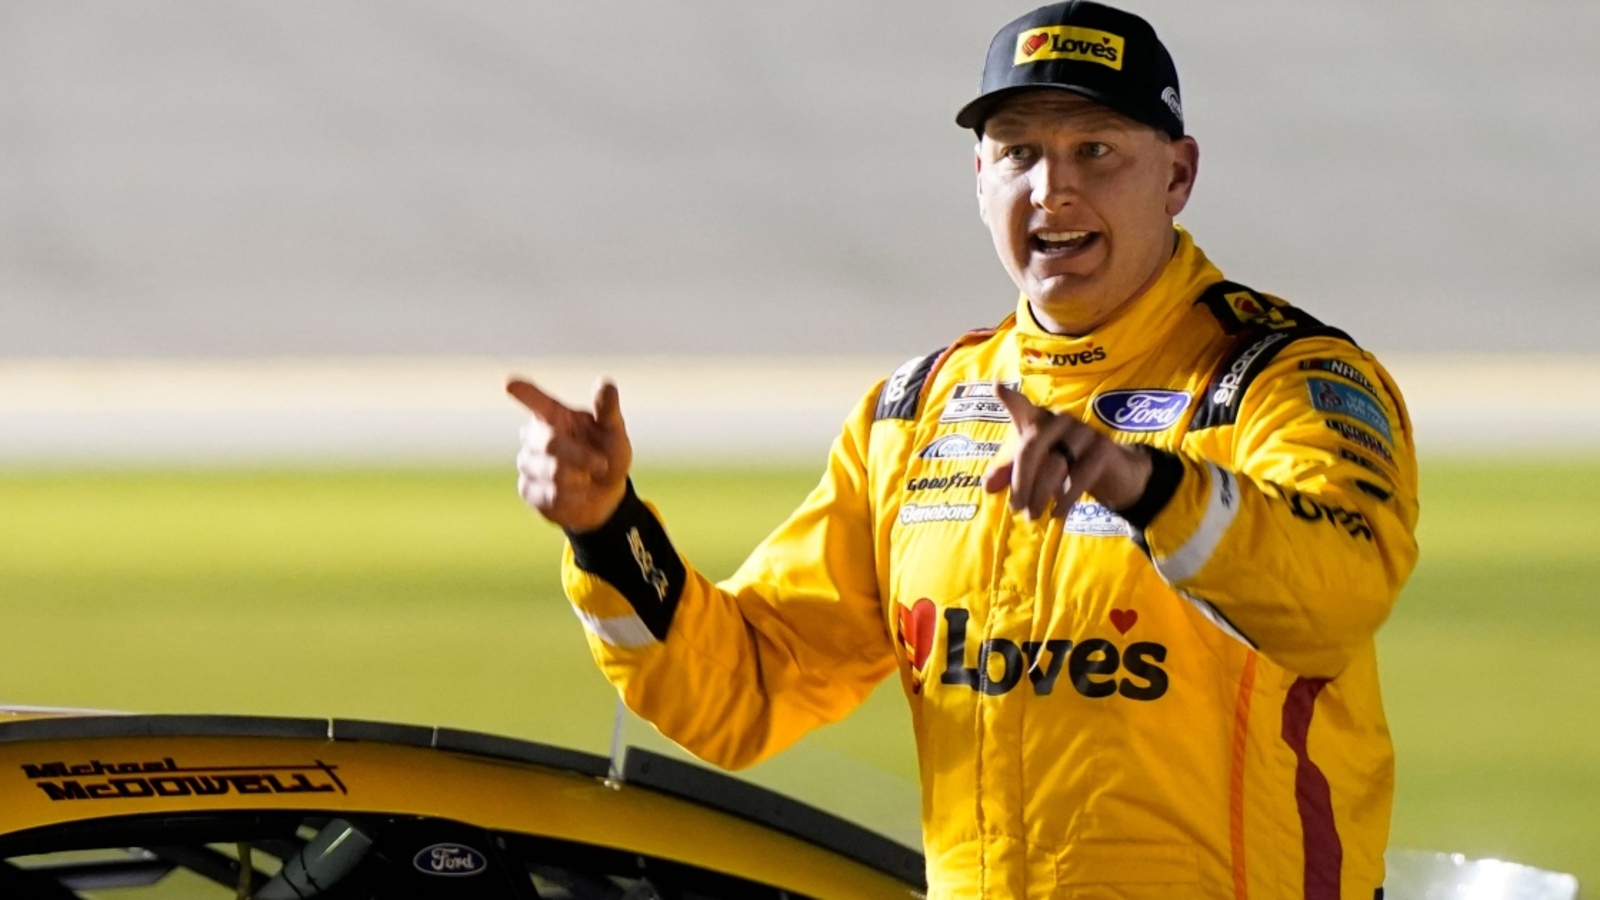 Michael McDowell wins first career pole award after 467 starts ahead of Ambetter Health 400